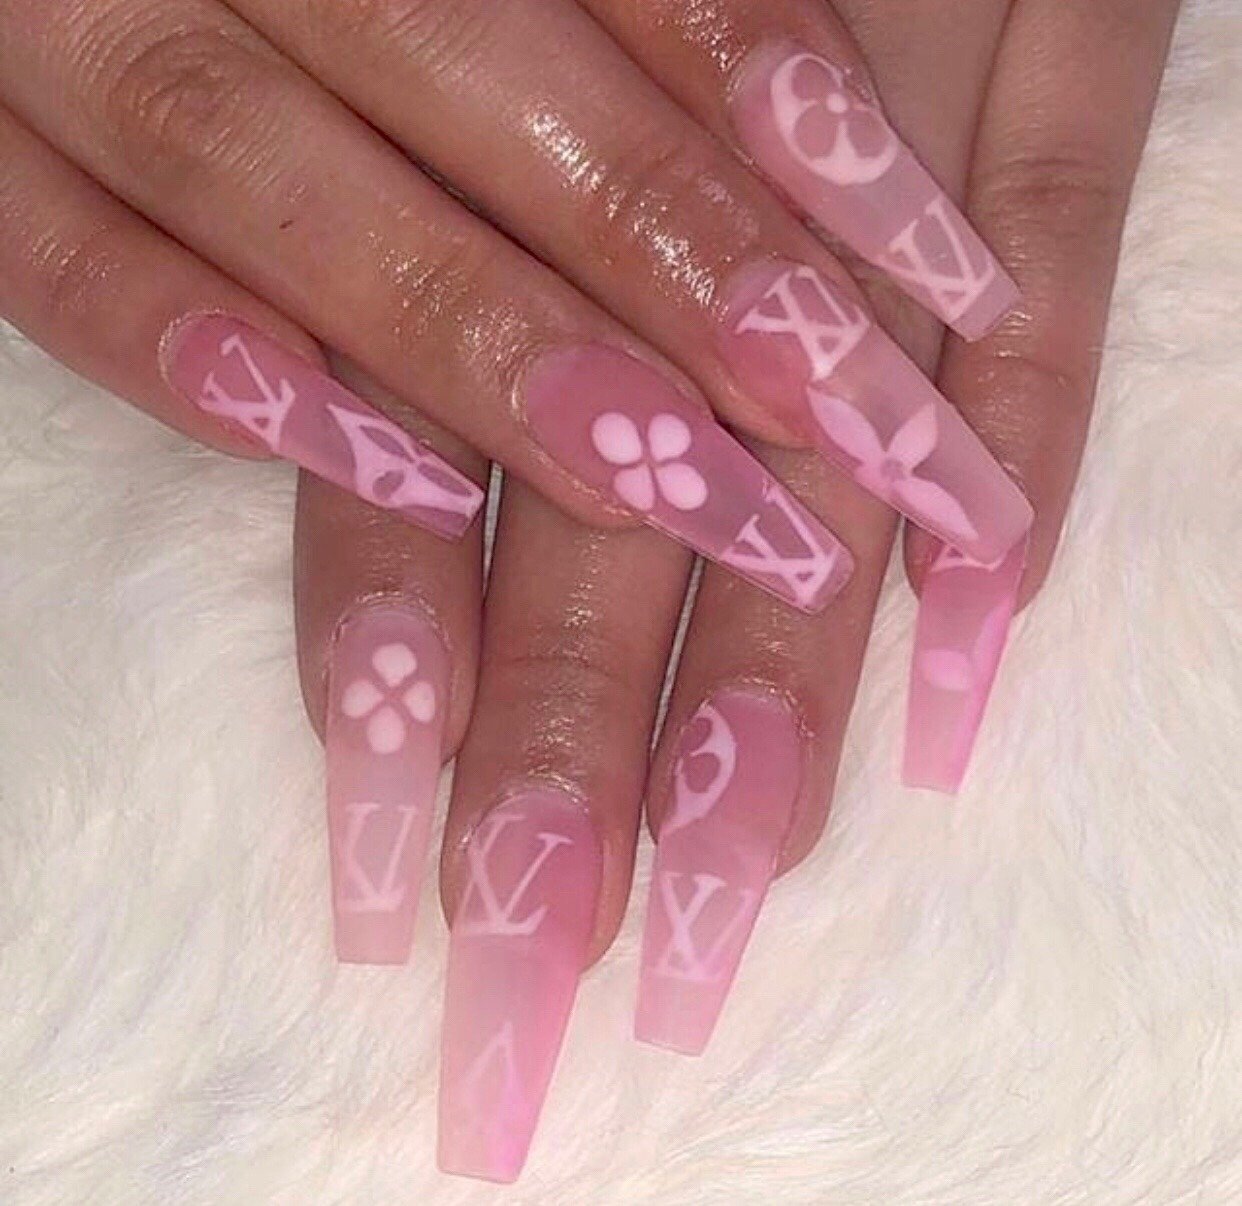 image about nails. See more about nails, beauty and nail art